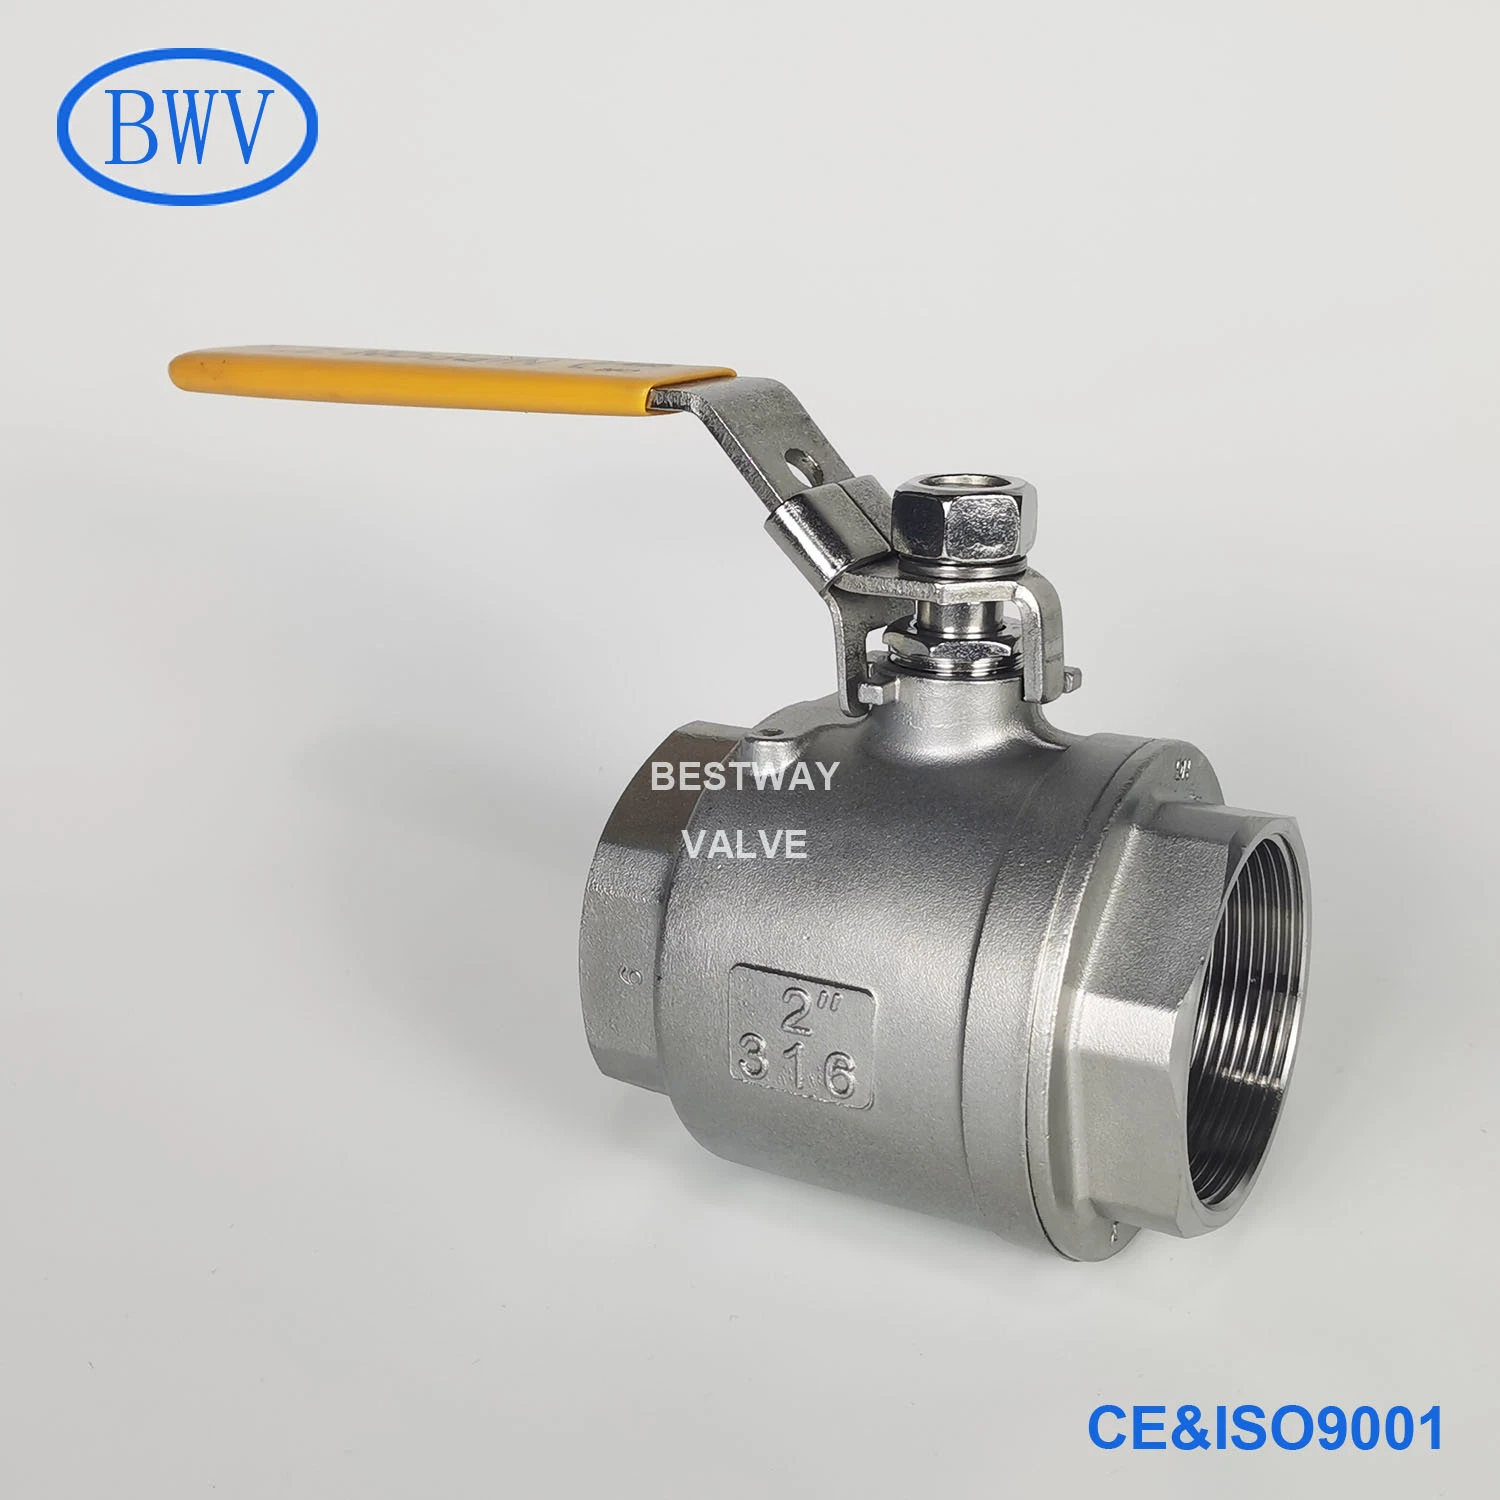 1000wog/1000psi Pn63 CF8 CF8m 304 316 Wcb NPT/BSPT/BSPP Thread End Industrial 2PC Stainless Steel Manual Floating Ball Valve